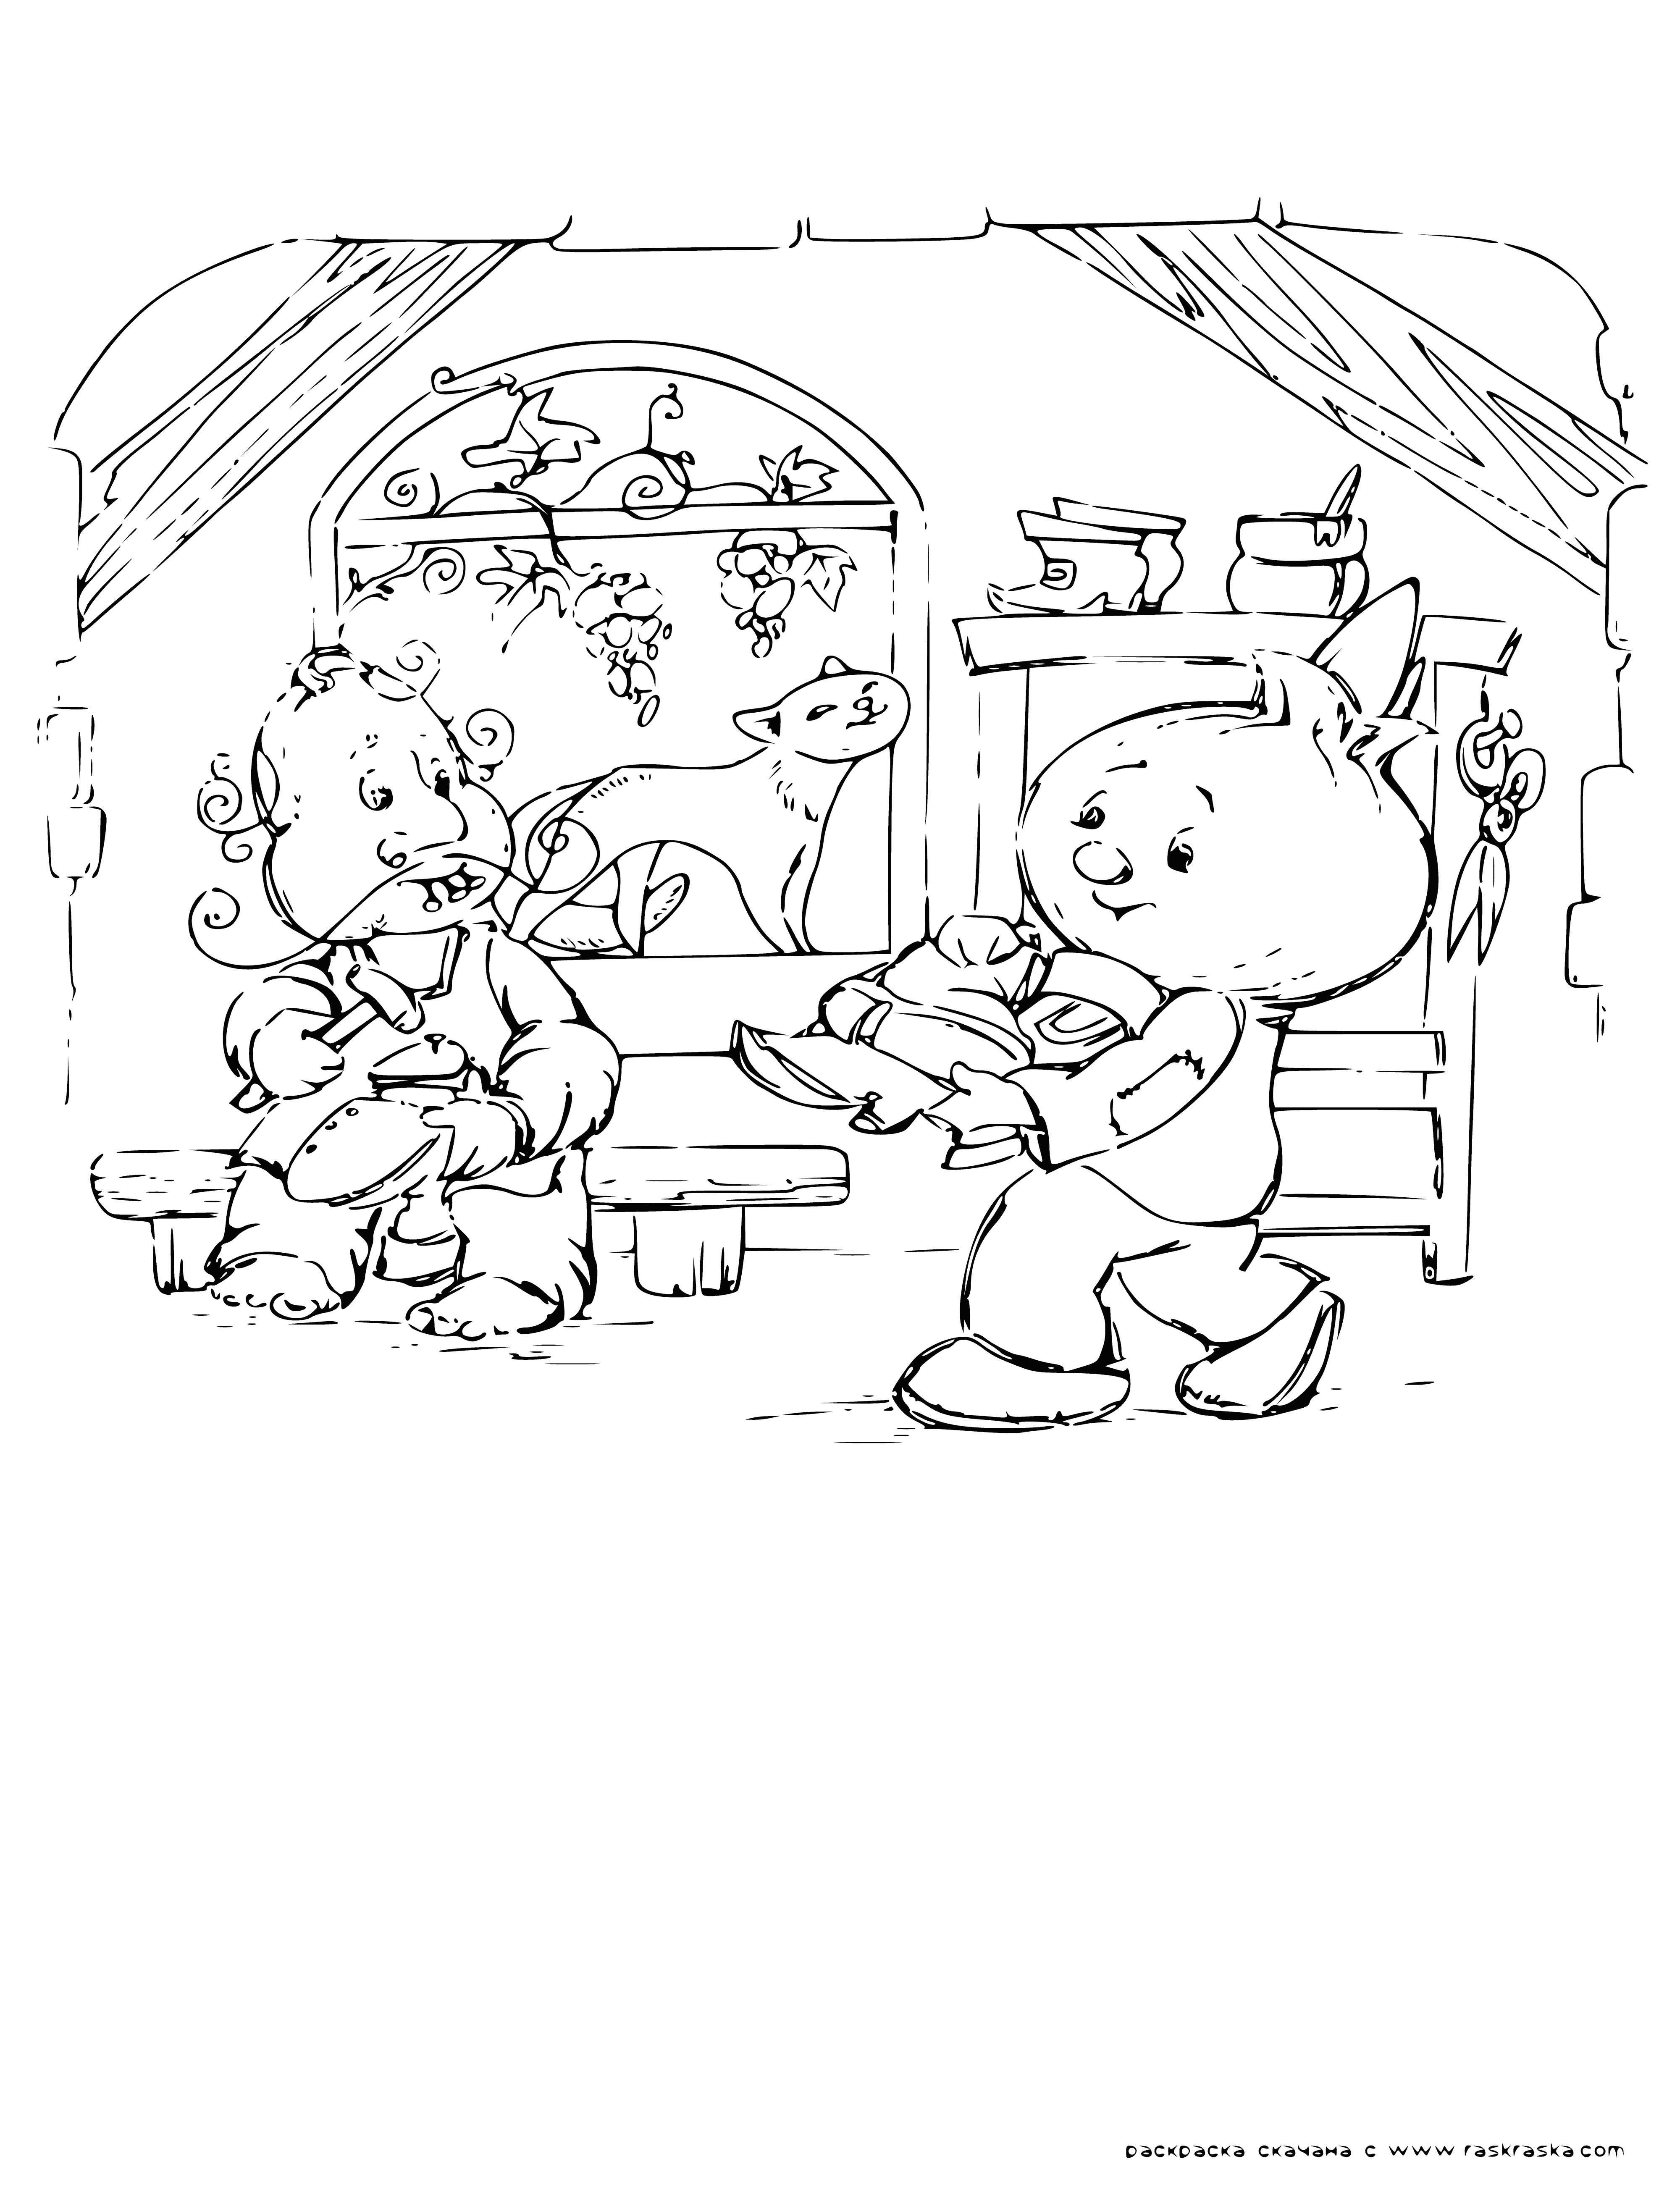 Chipollino and shoemaker coloring page